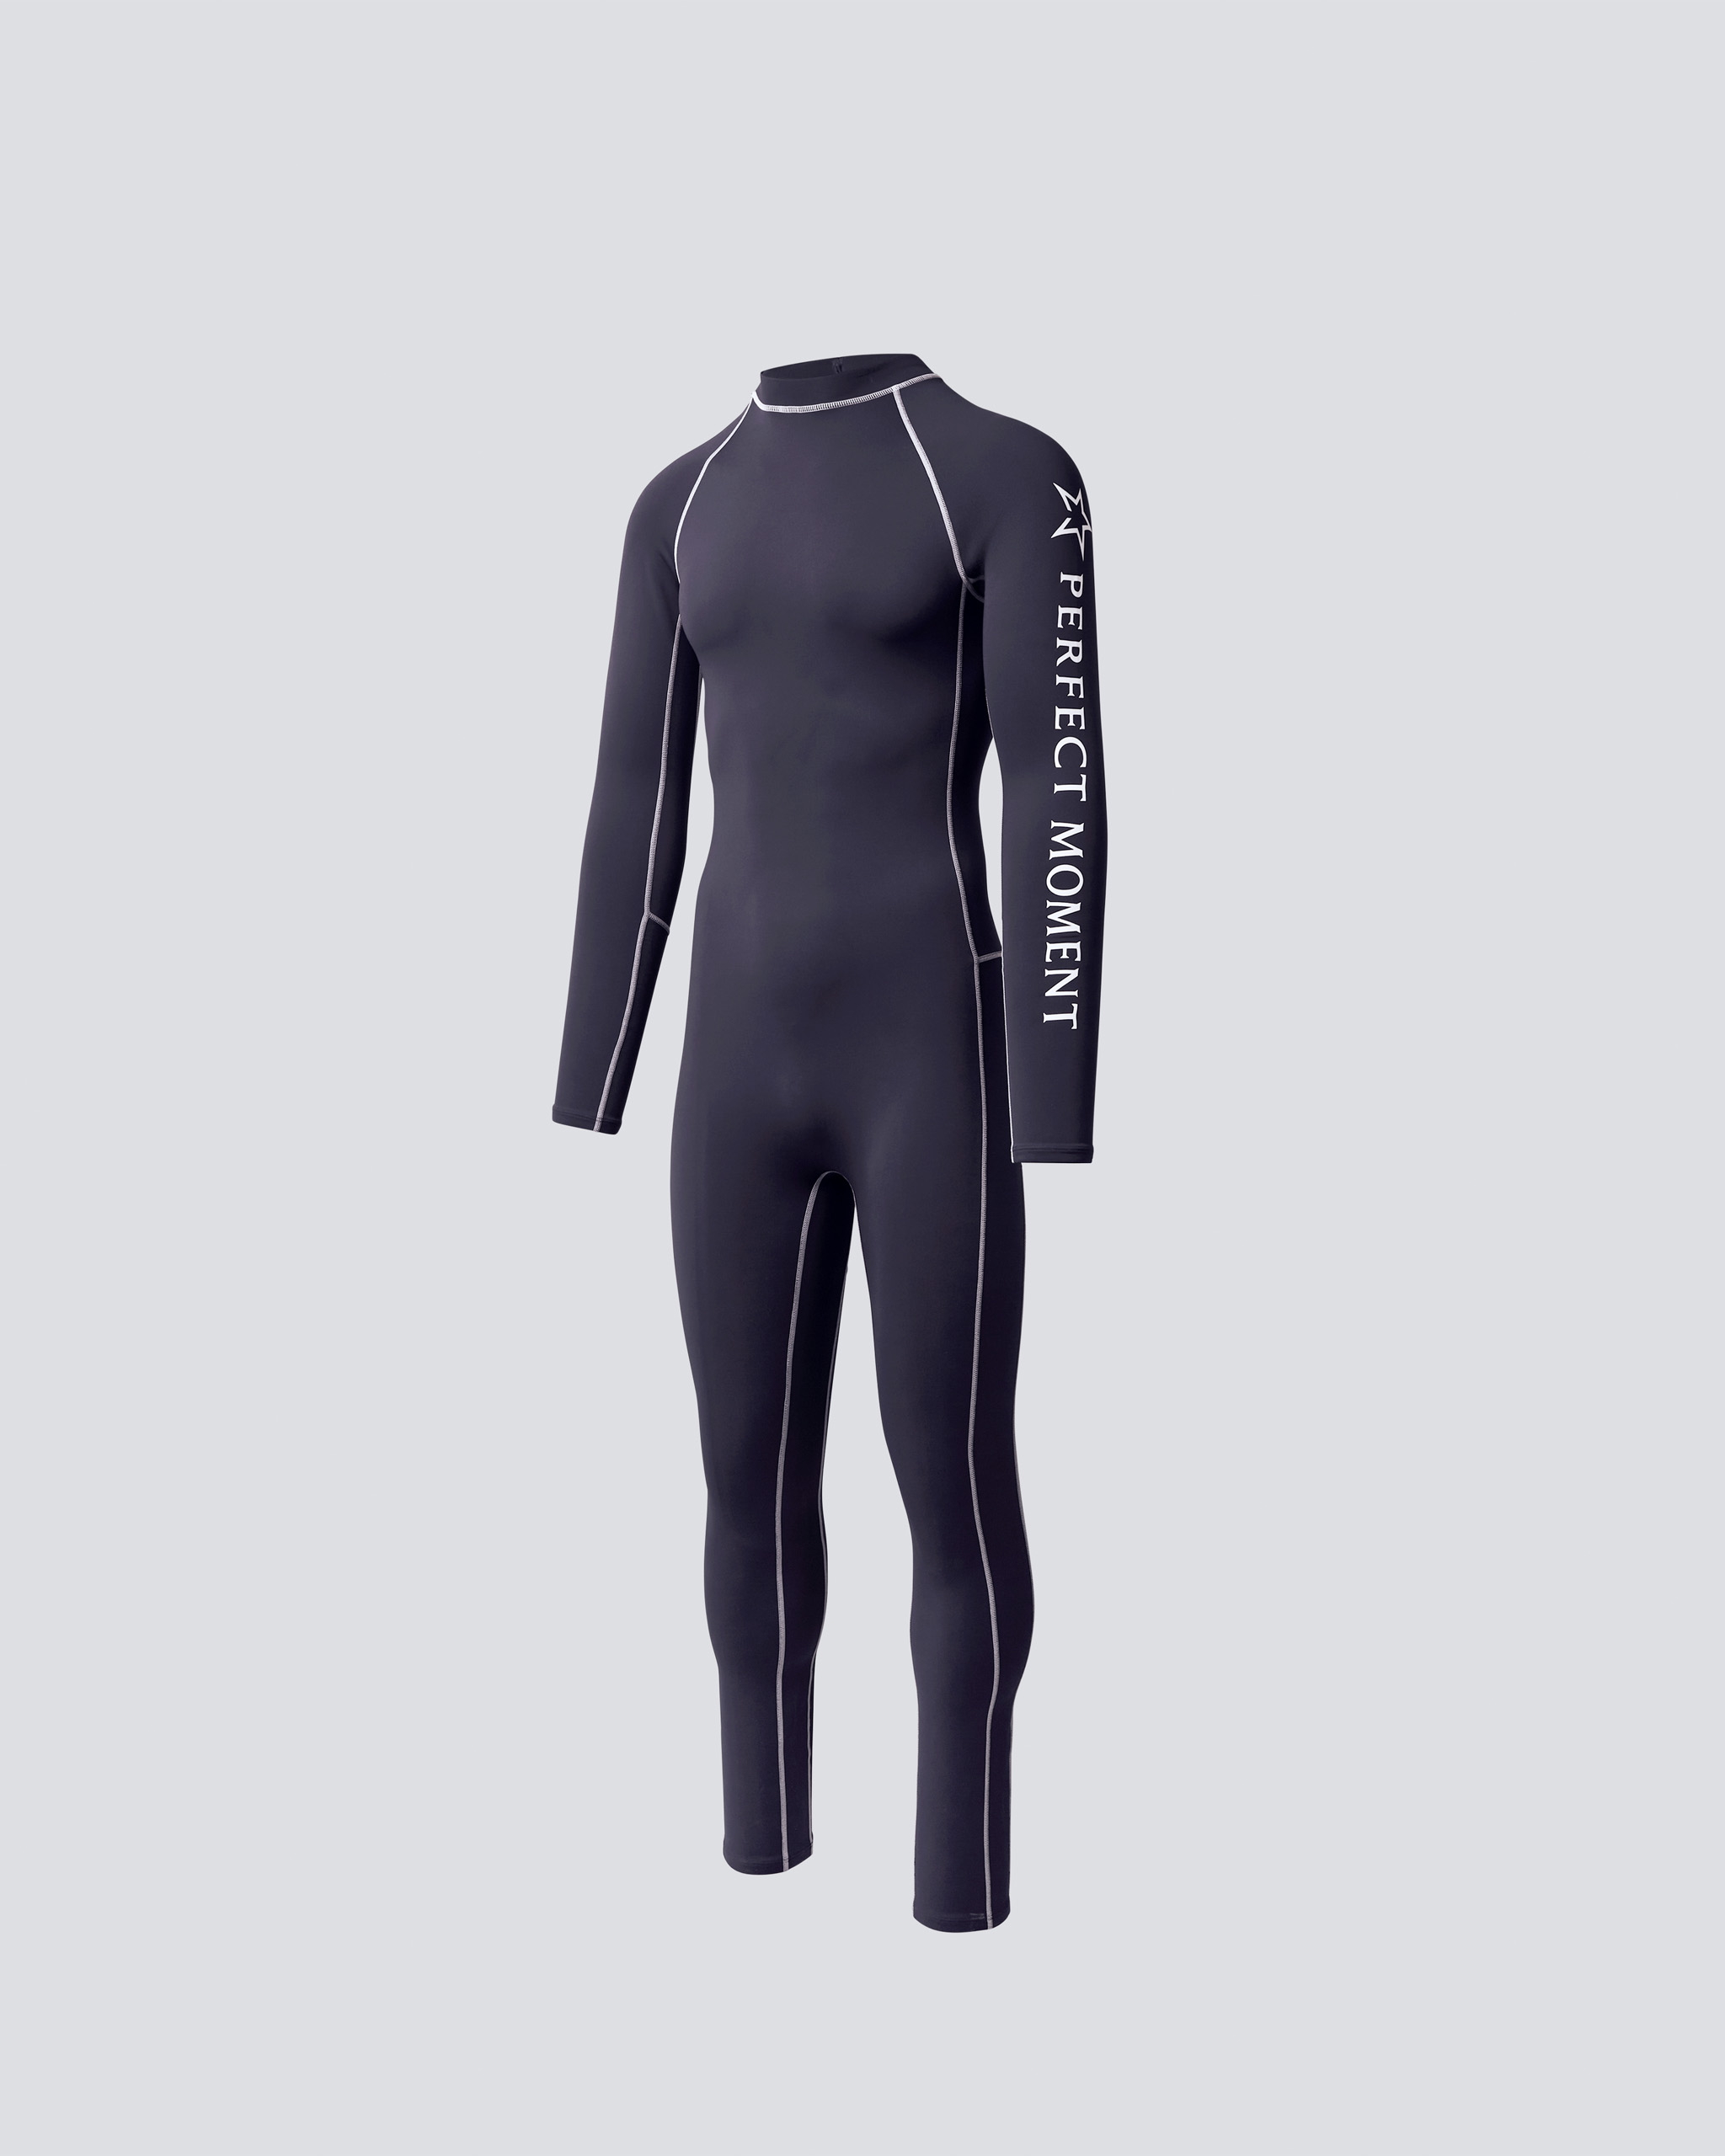 Perfect Moment Neptune Wetsuit Xl In Asphalt-grey